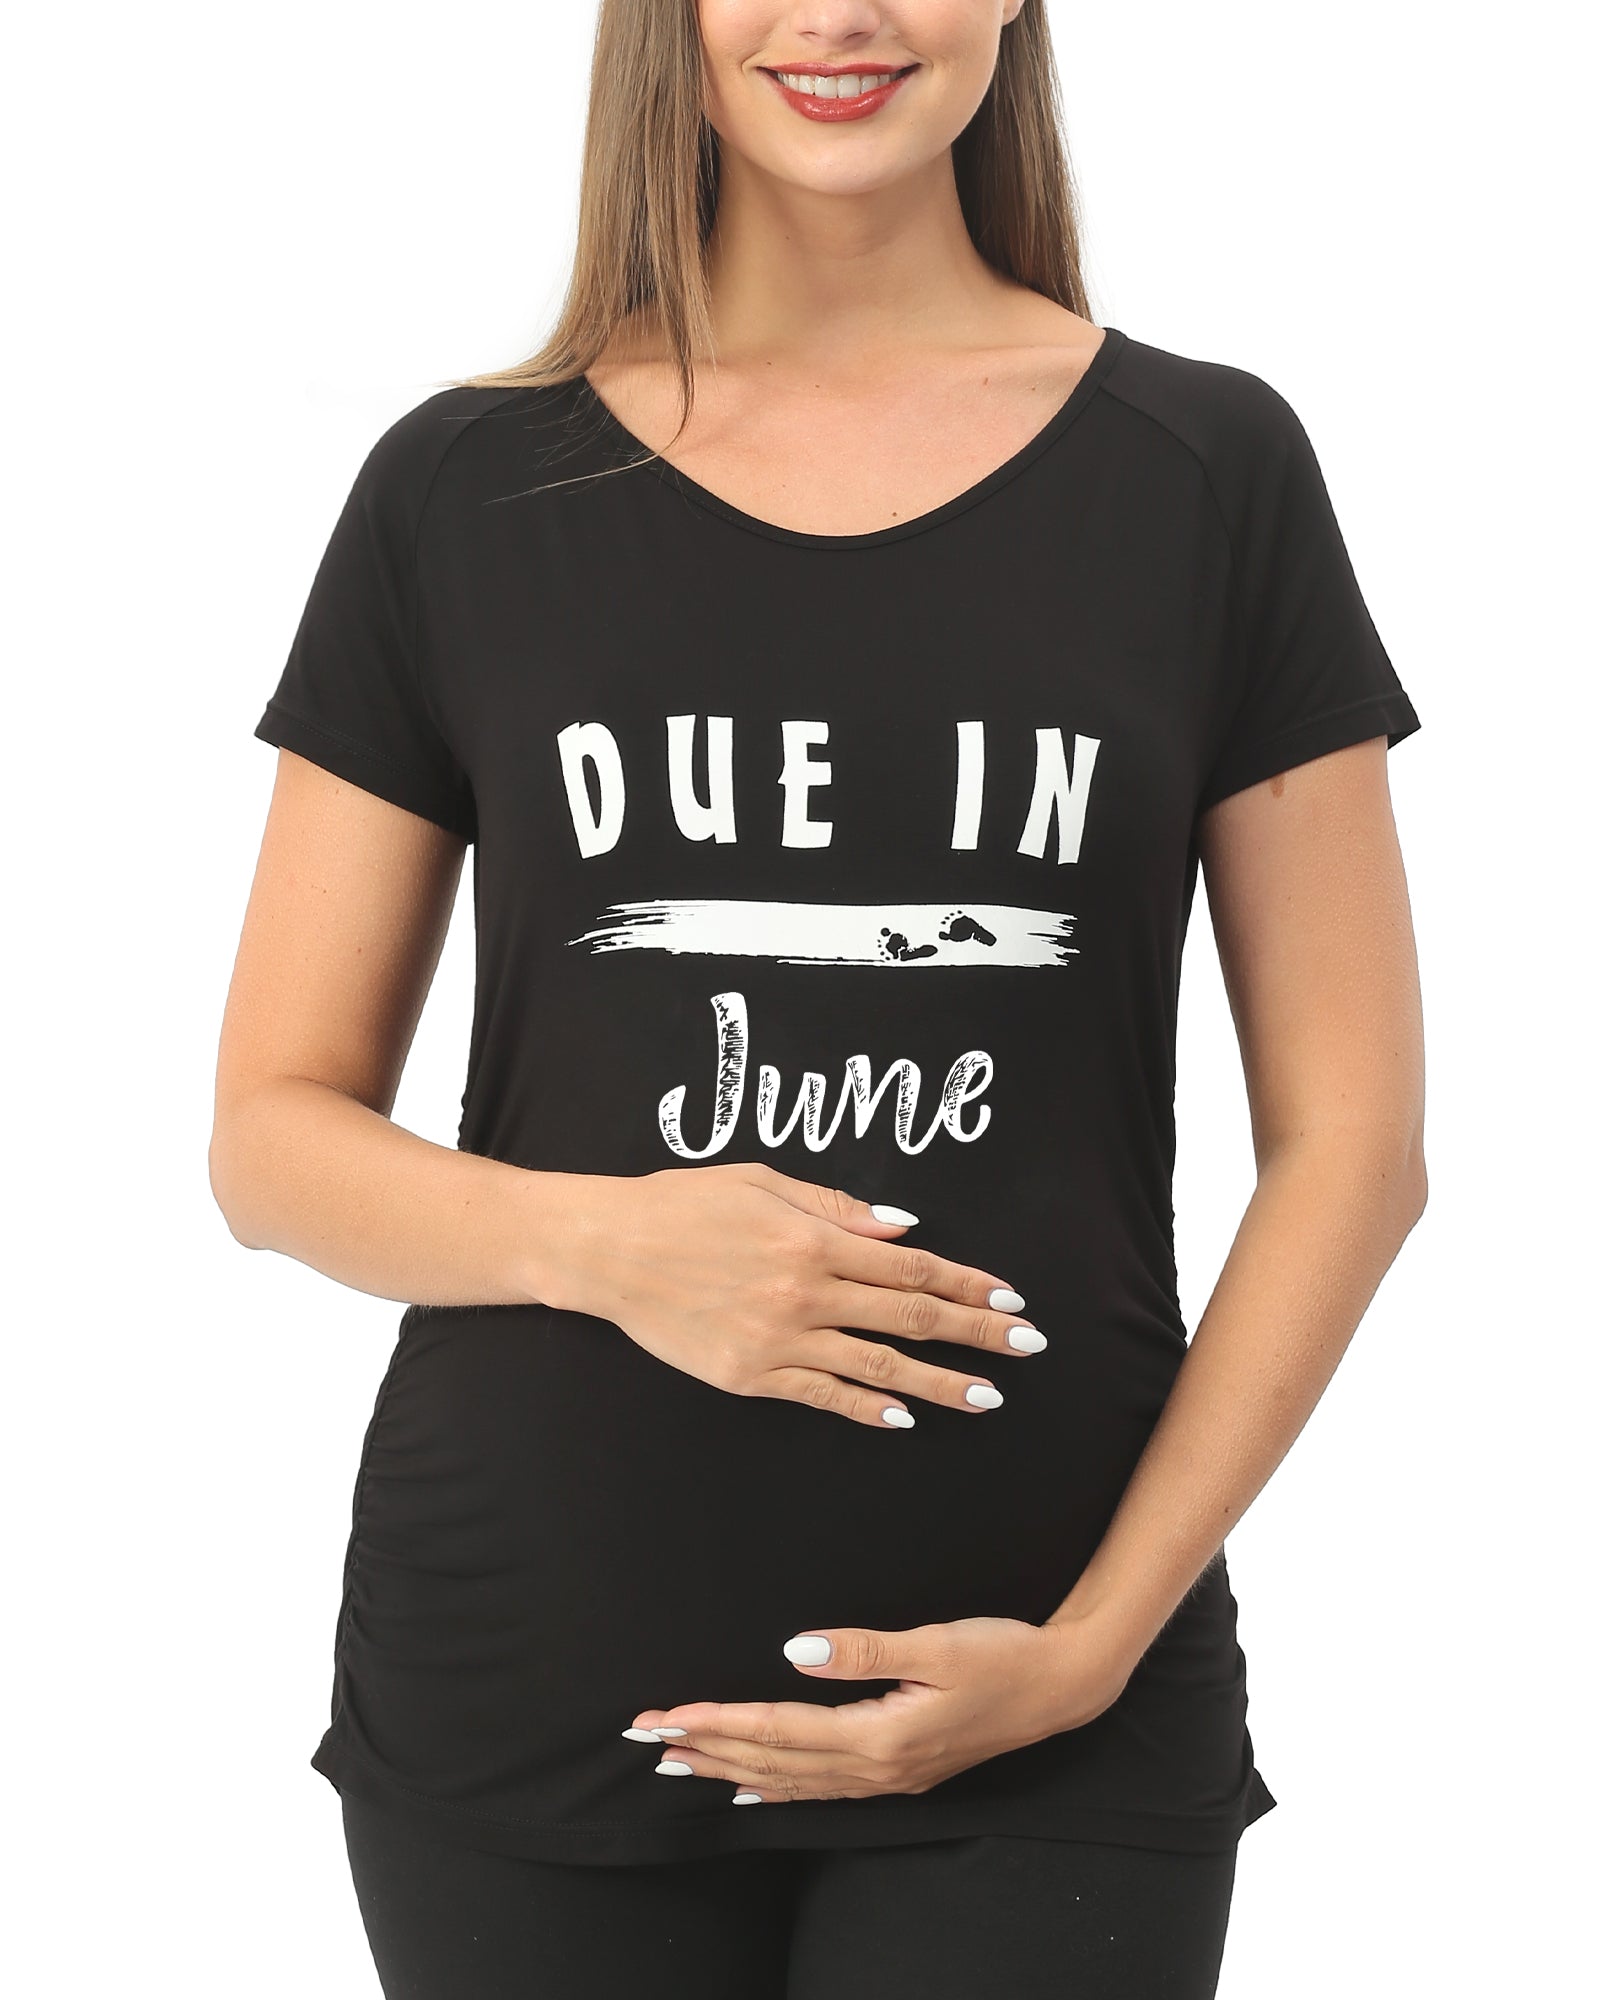 Due in Graphic Maternity Shirts,June